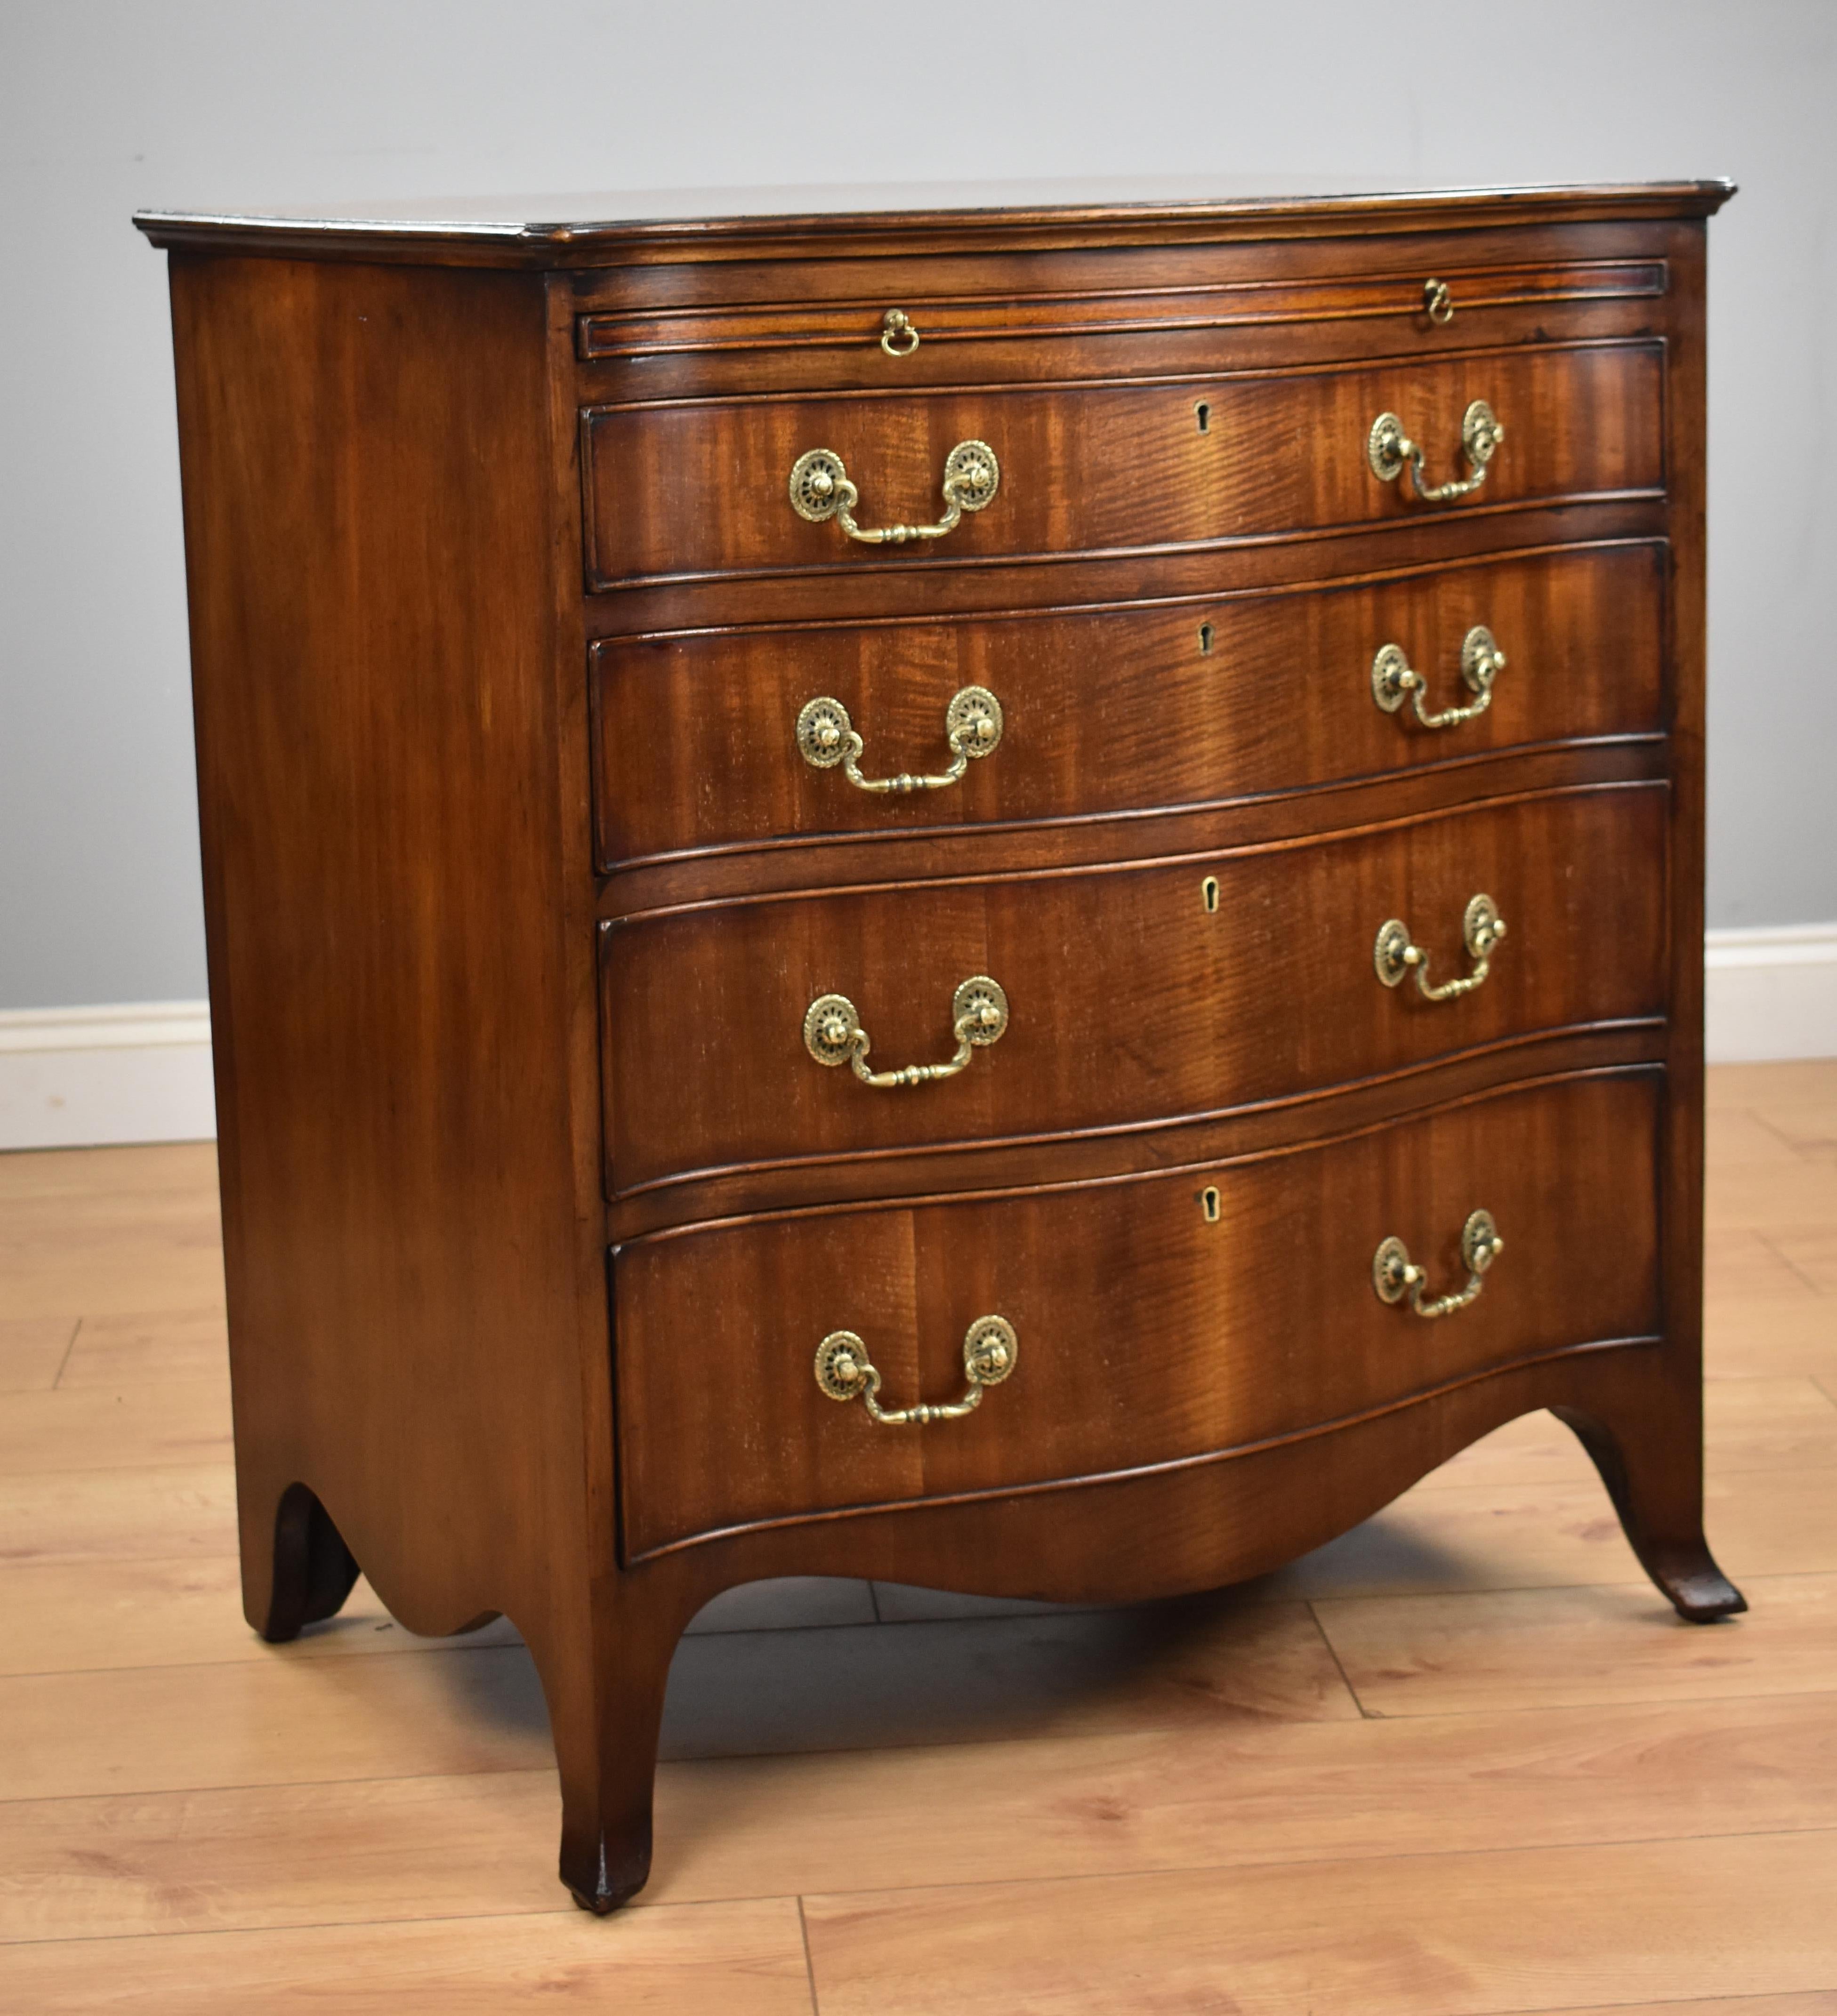 Antique Georgian style mahogany serpentine fronted chest drawers in good condition having been recently polished by hand. The chest has a moulded top over brushing slide with four long drawers standing on apron base with splayed feet.